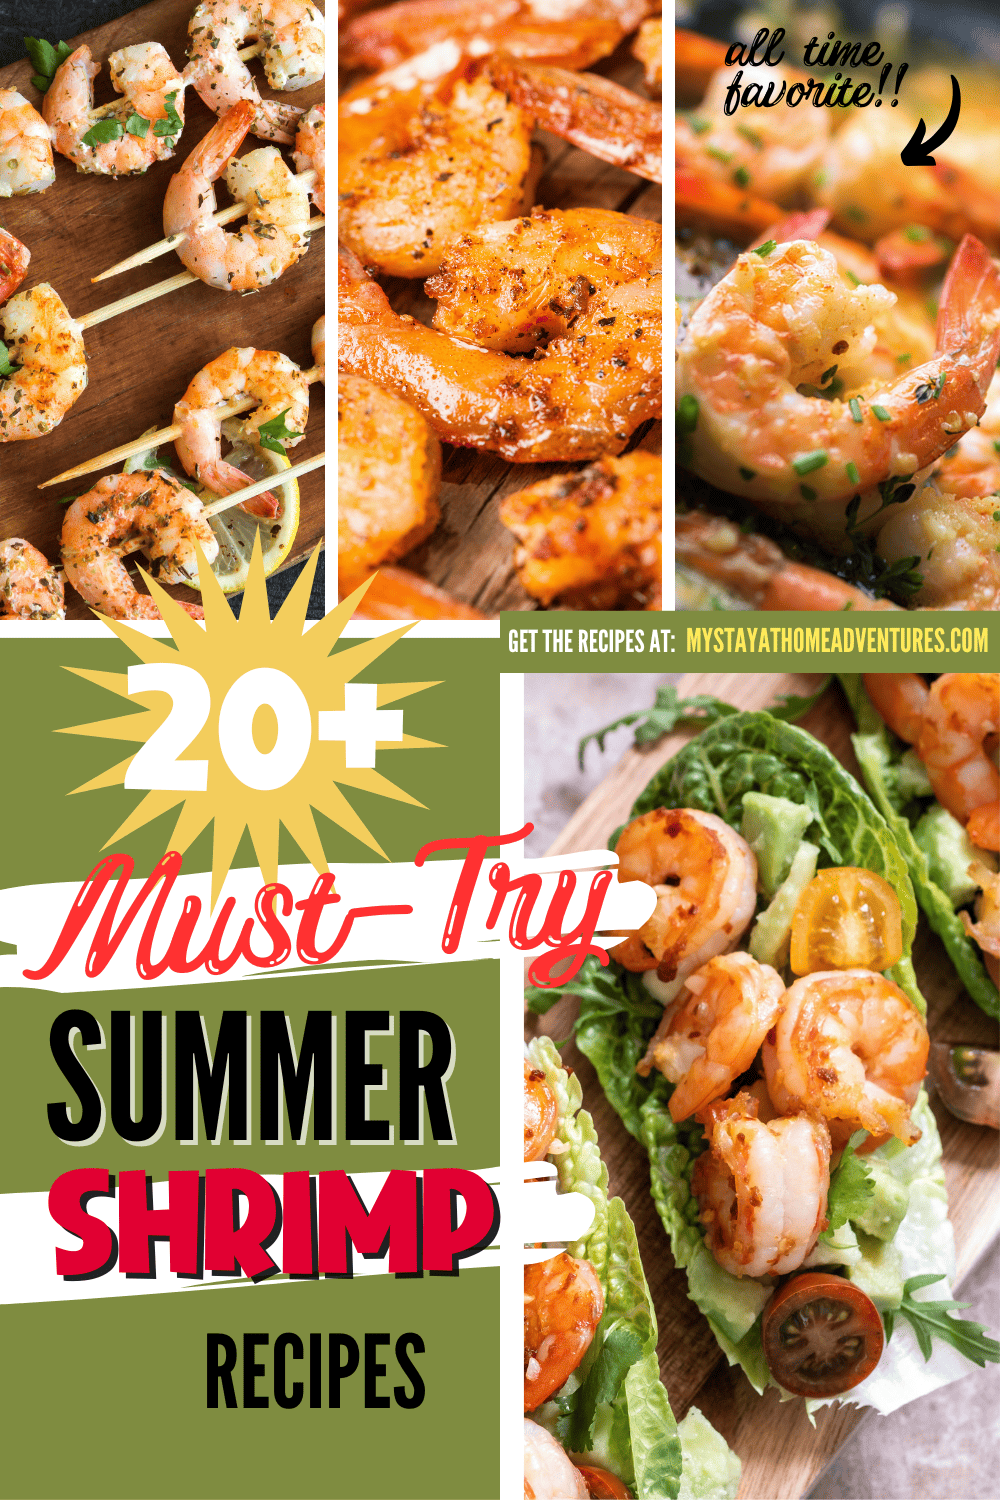 Spice up your summer meals with these delicious and easy-to-prepare summer shrimp recipes! Cook up the perfect shrimp every time with our tips and tricks! Click now to discover 20 must-try summer shrimp recipes and make mealtime extra special this season. via @mystayathome